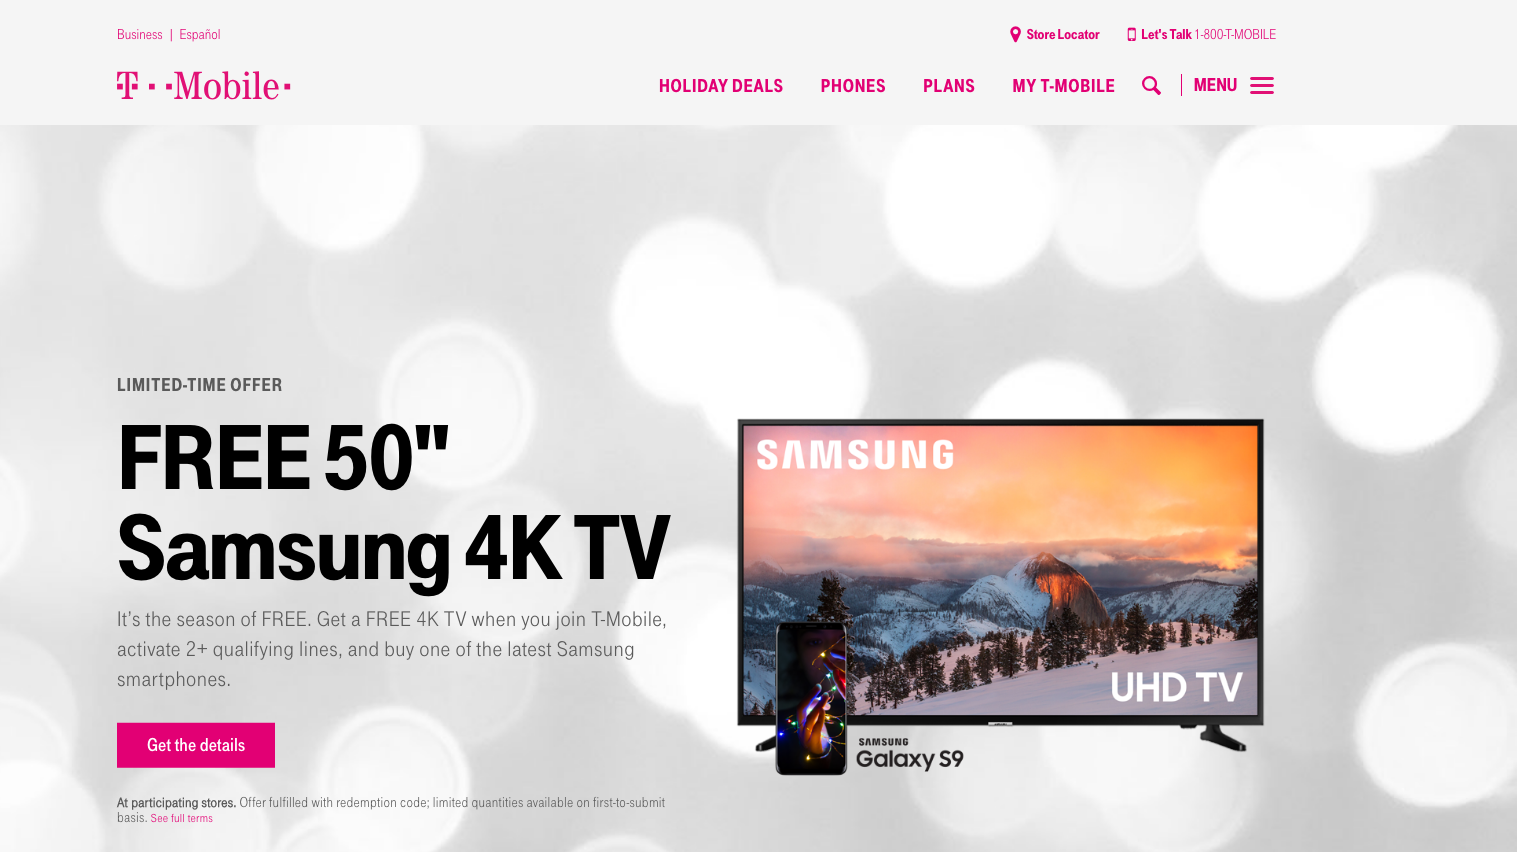 tmobile.com is a good website design example for its great use of design patterns